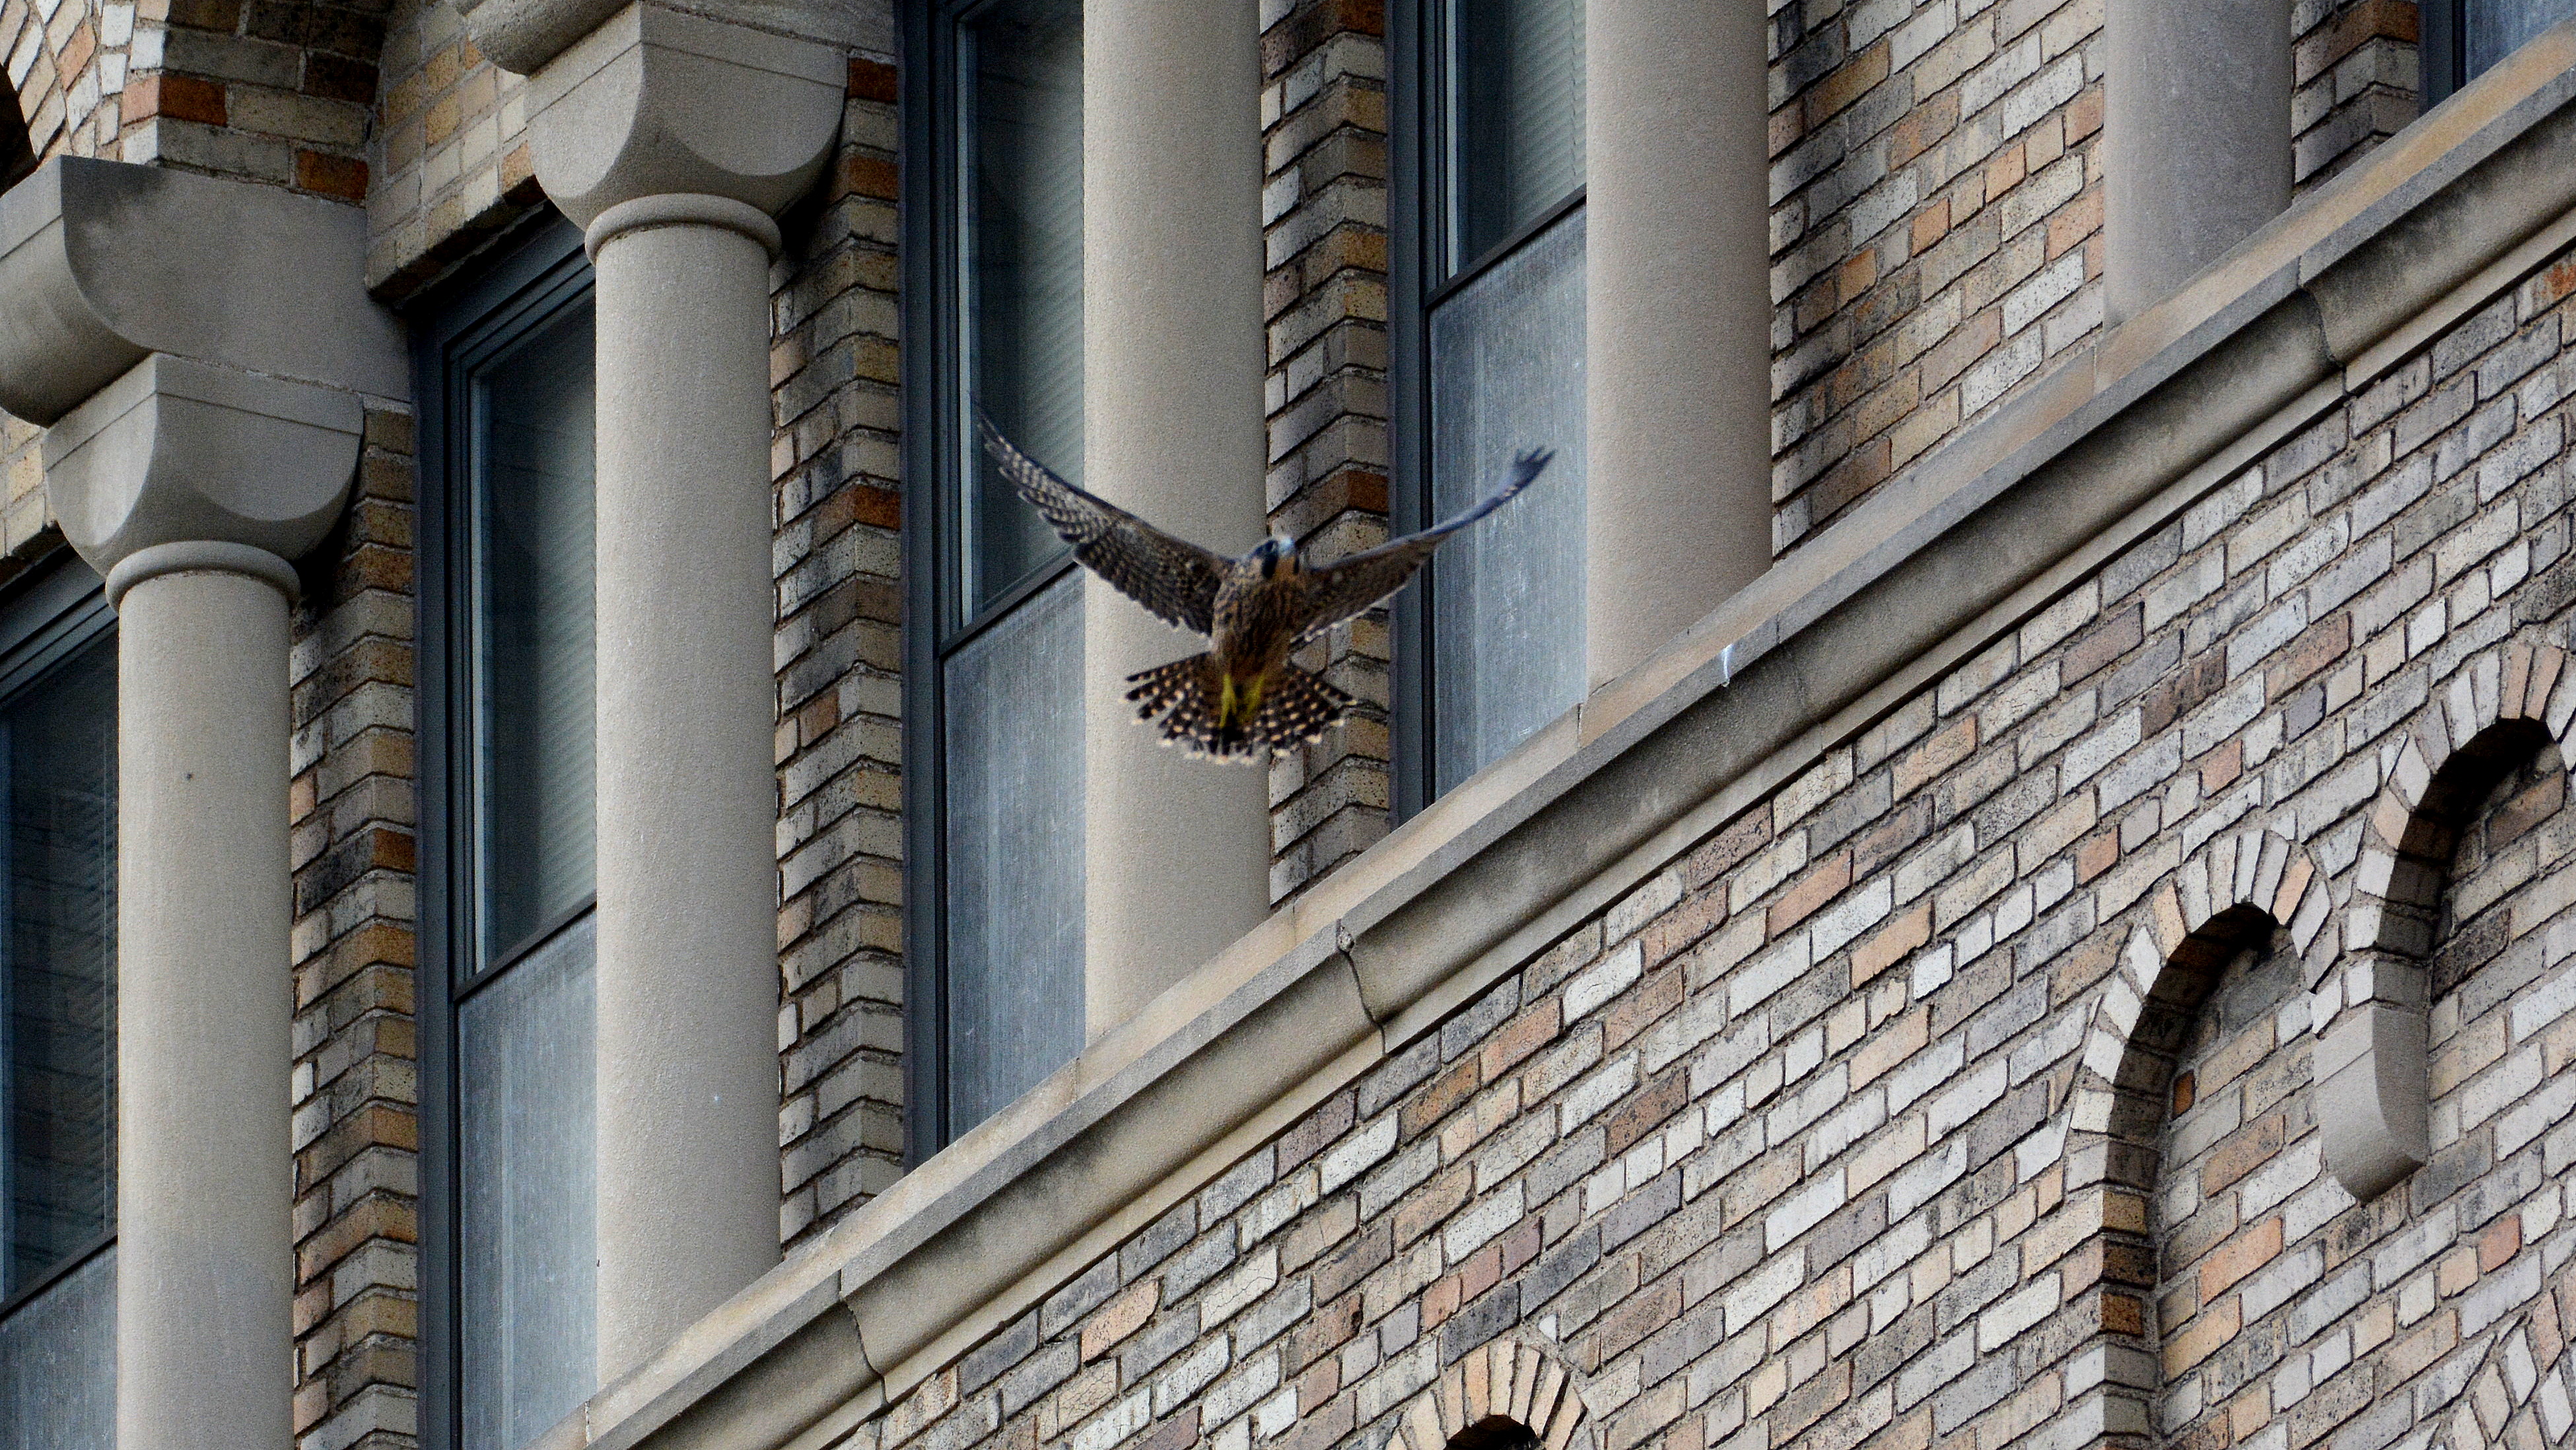 Zander flies from his perch near the west side of ADK Bank, all the way to the roof